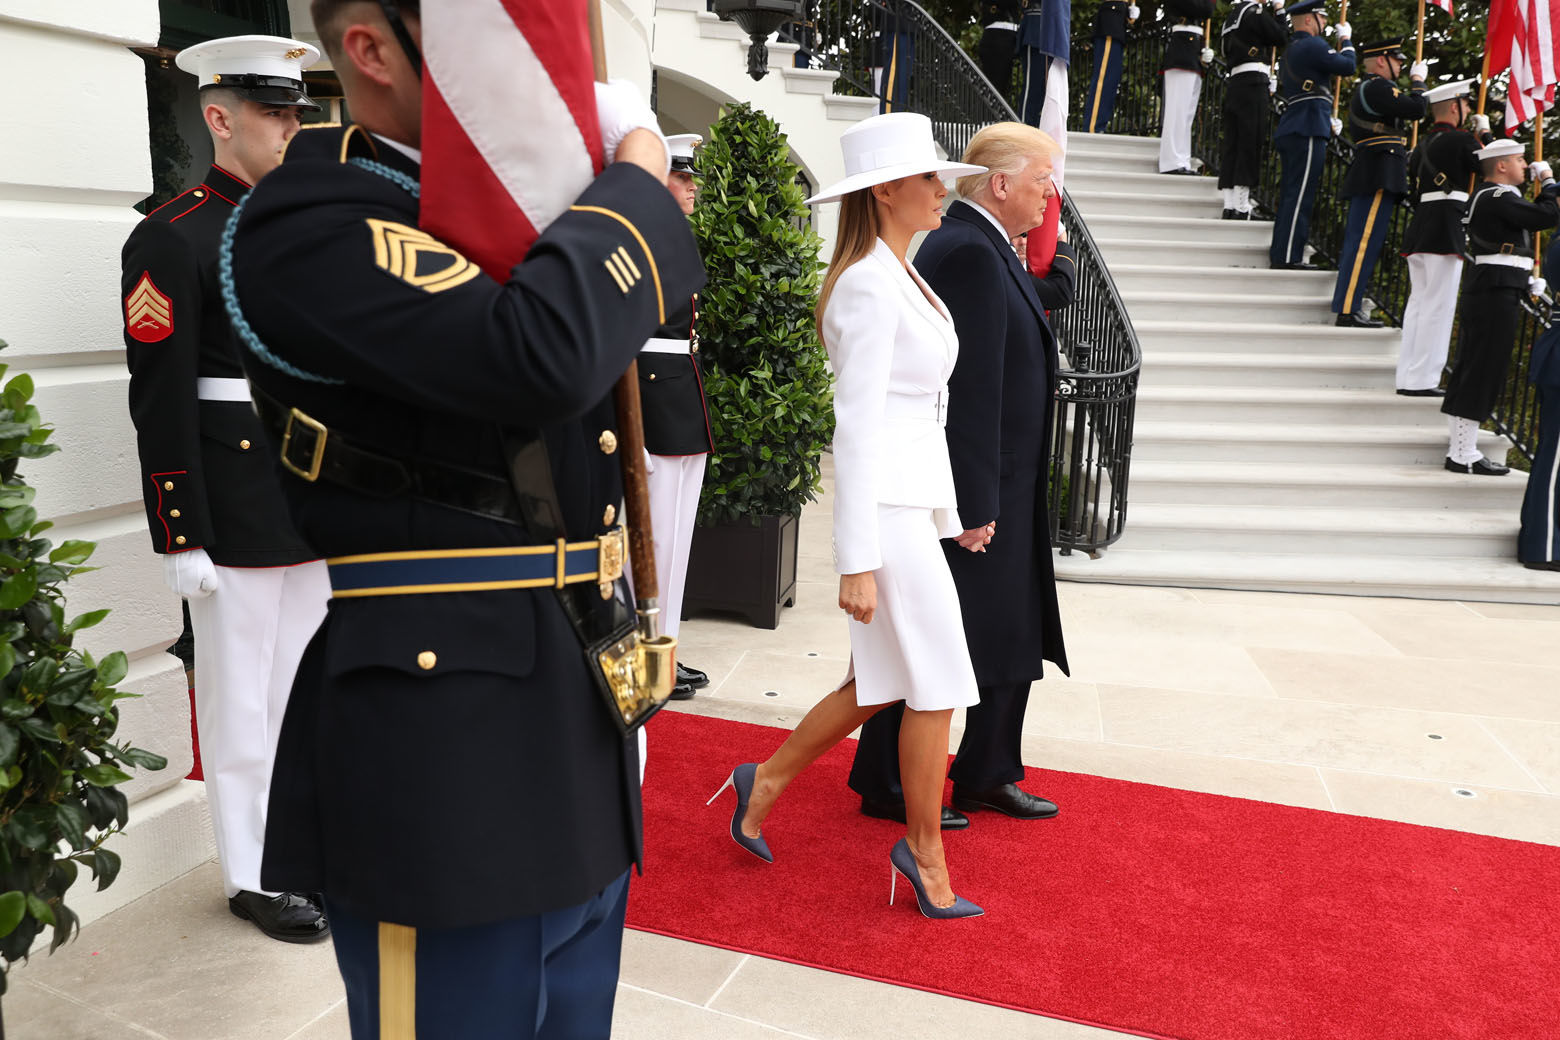 President Donald Trump and first lady Melania Trump walk out of the White House at the beginning of a State Arrival Ceremony on the South Lawn of the White House in Washington, Tuesday, April 24, 2018.   Praising the strength of America's oldest alliance, Trump welcomed French President Emmanuel Macron to the White House Tuesday with a pomp-filled ceremony on the South Lawn. (AP Photo/Pablo Martinez Monsivais)